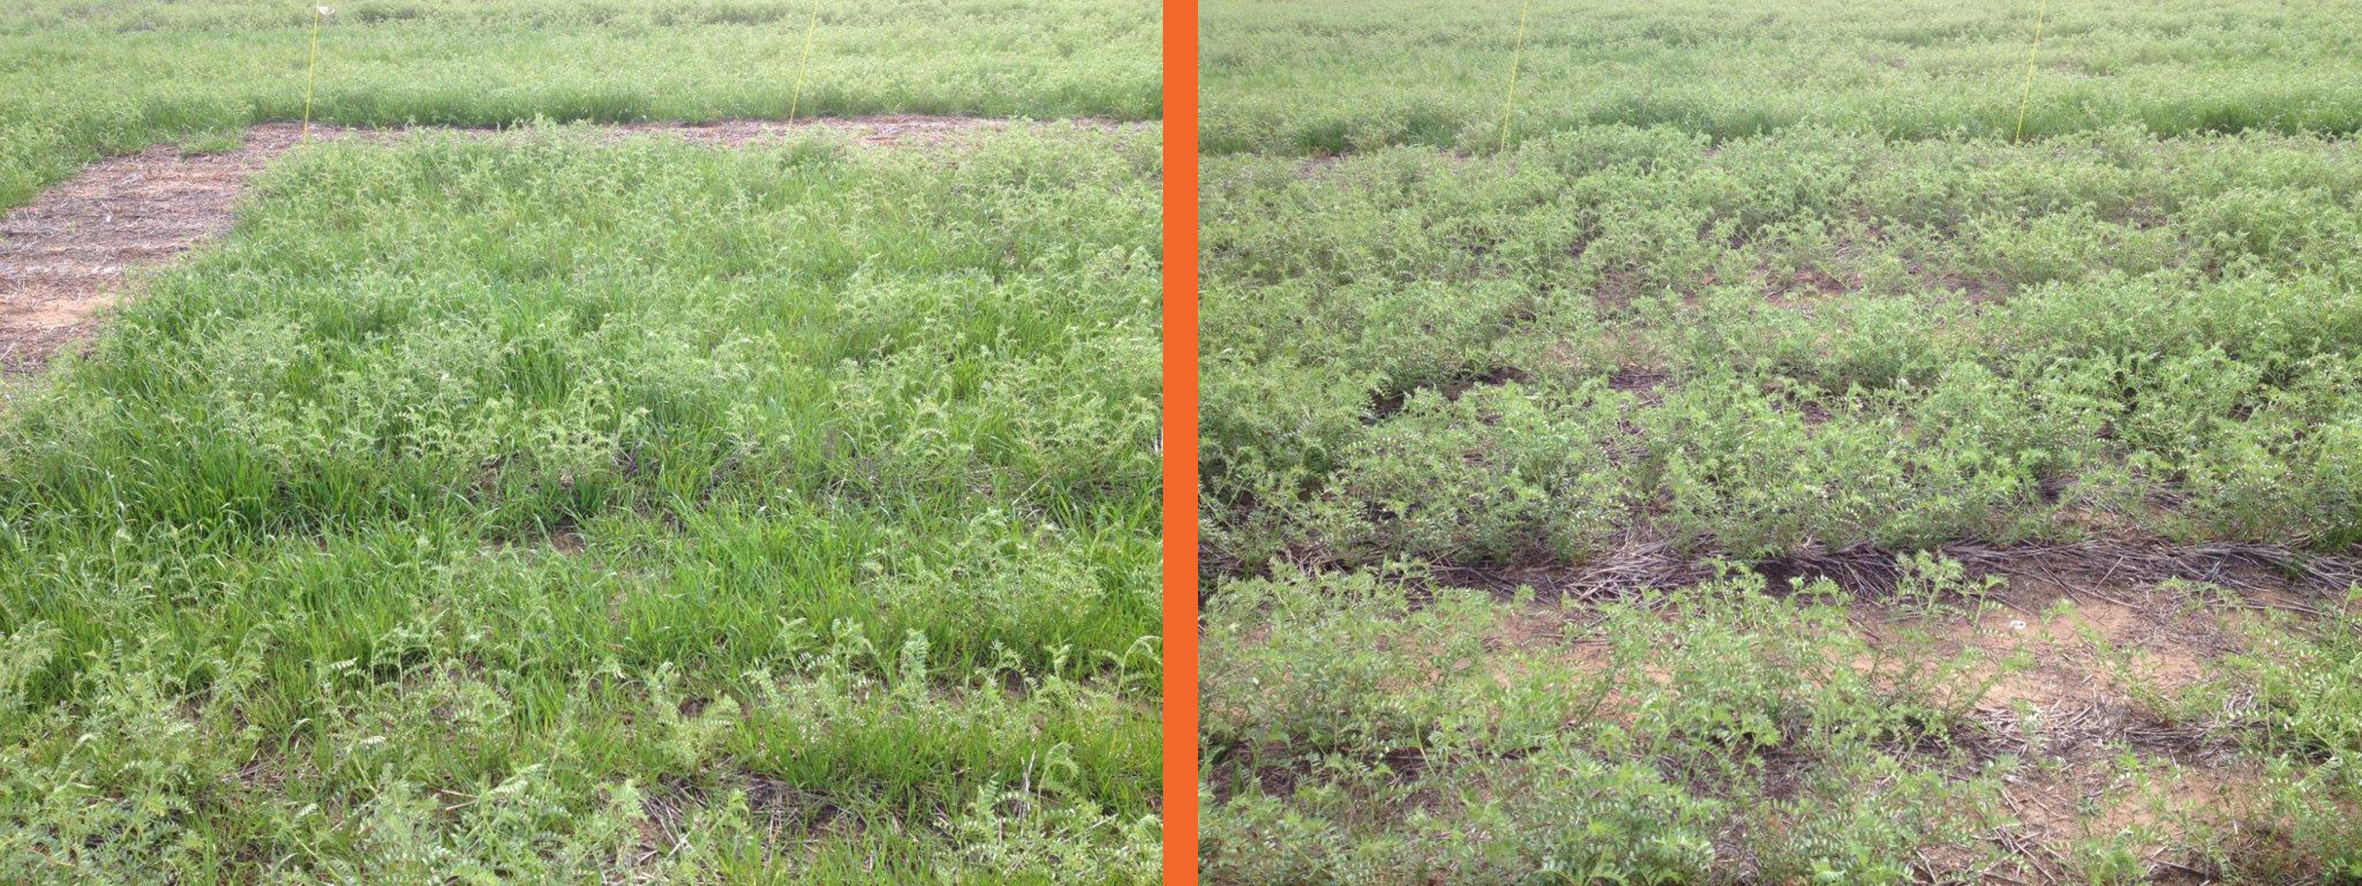 The trial identified pre-emergent product combinations that provided significantly better control (right) than the district standard practice (left) for herbicide resistant annual ryegrass. 